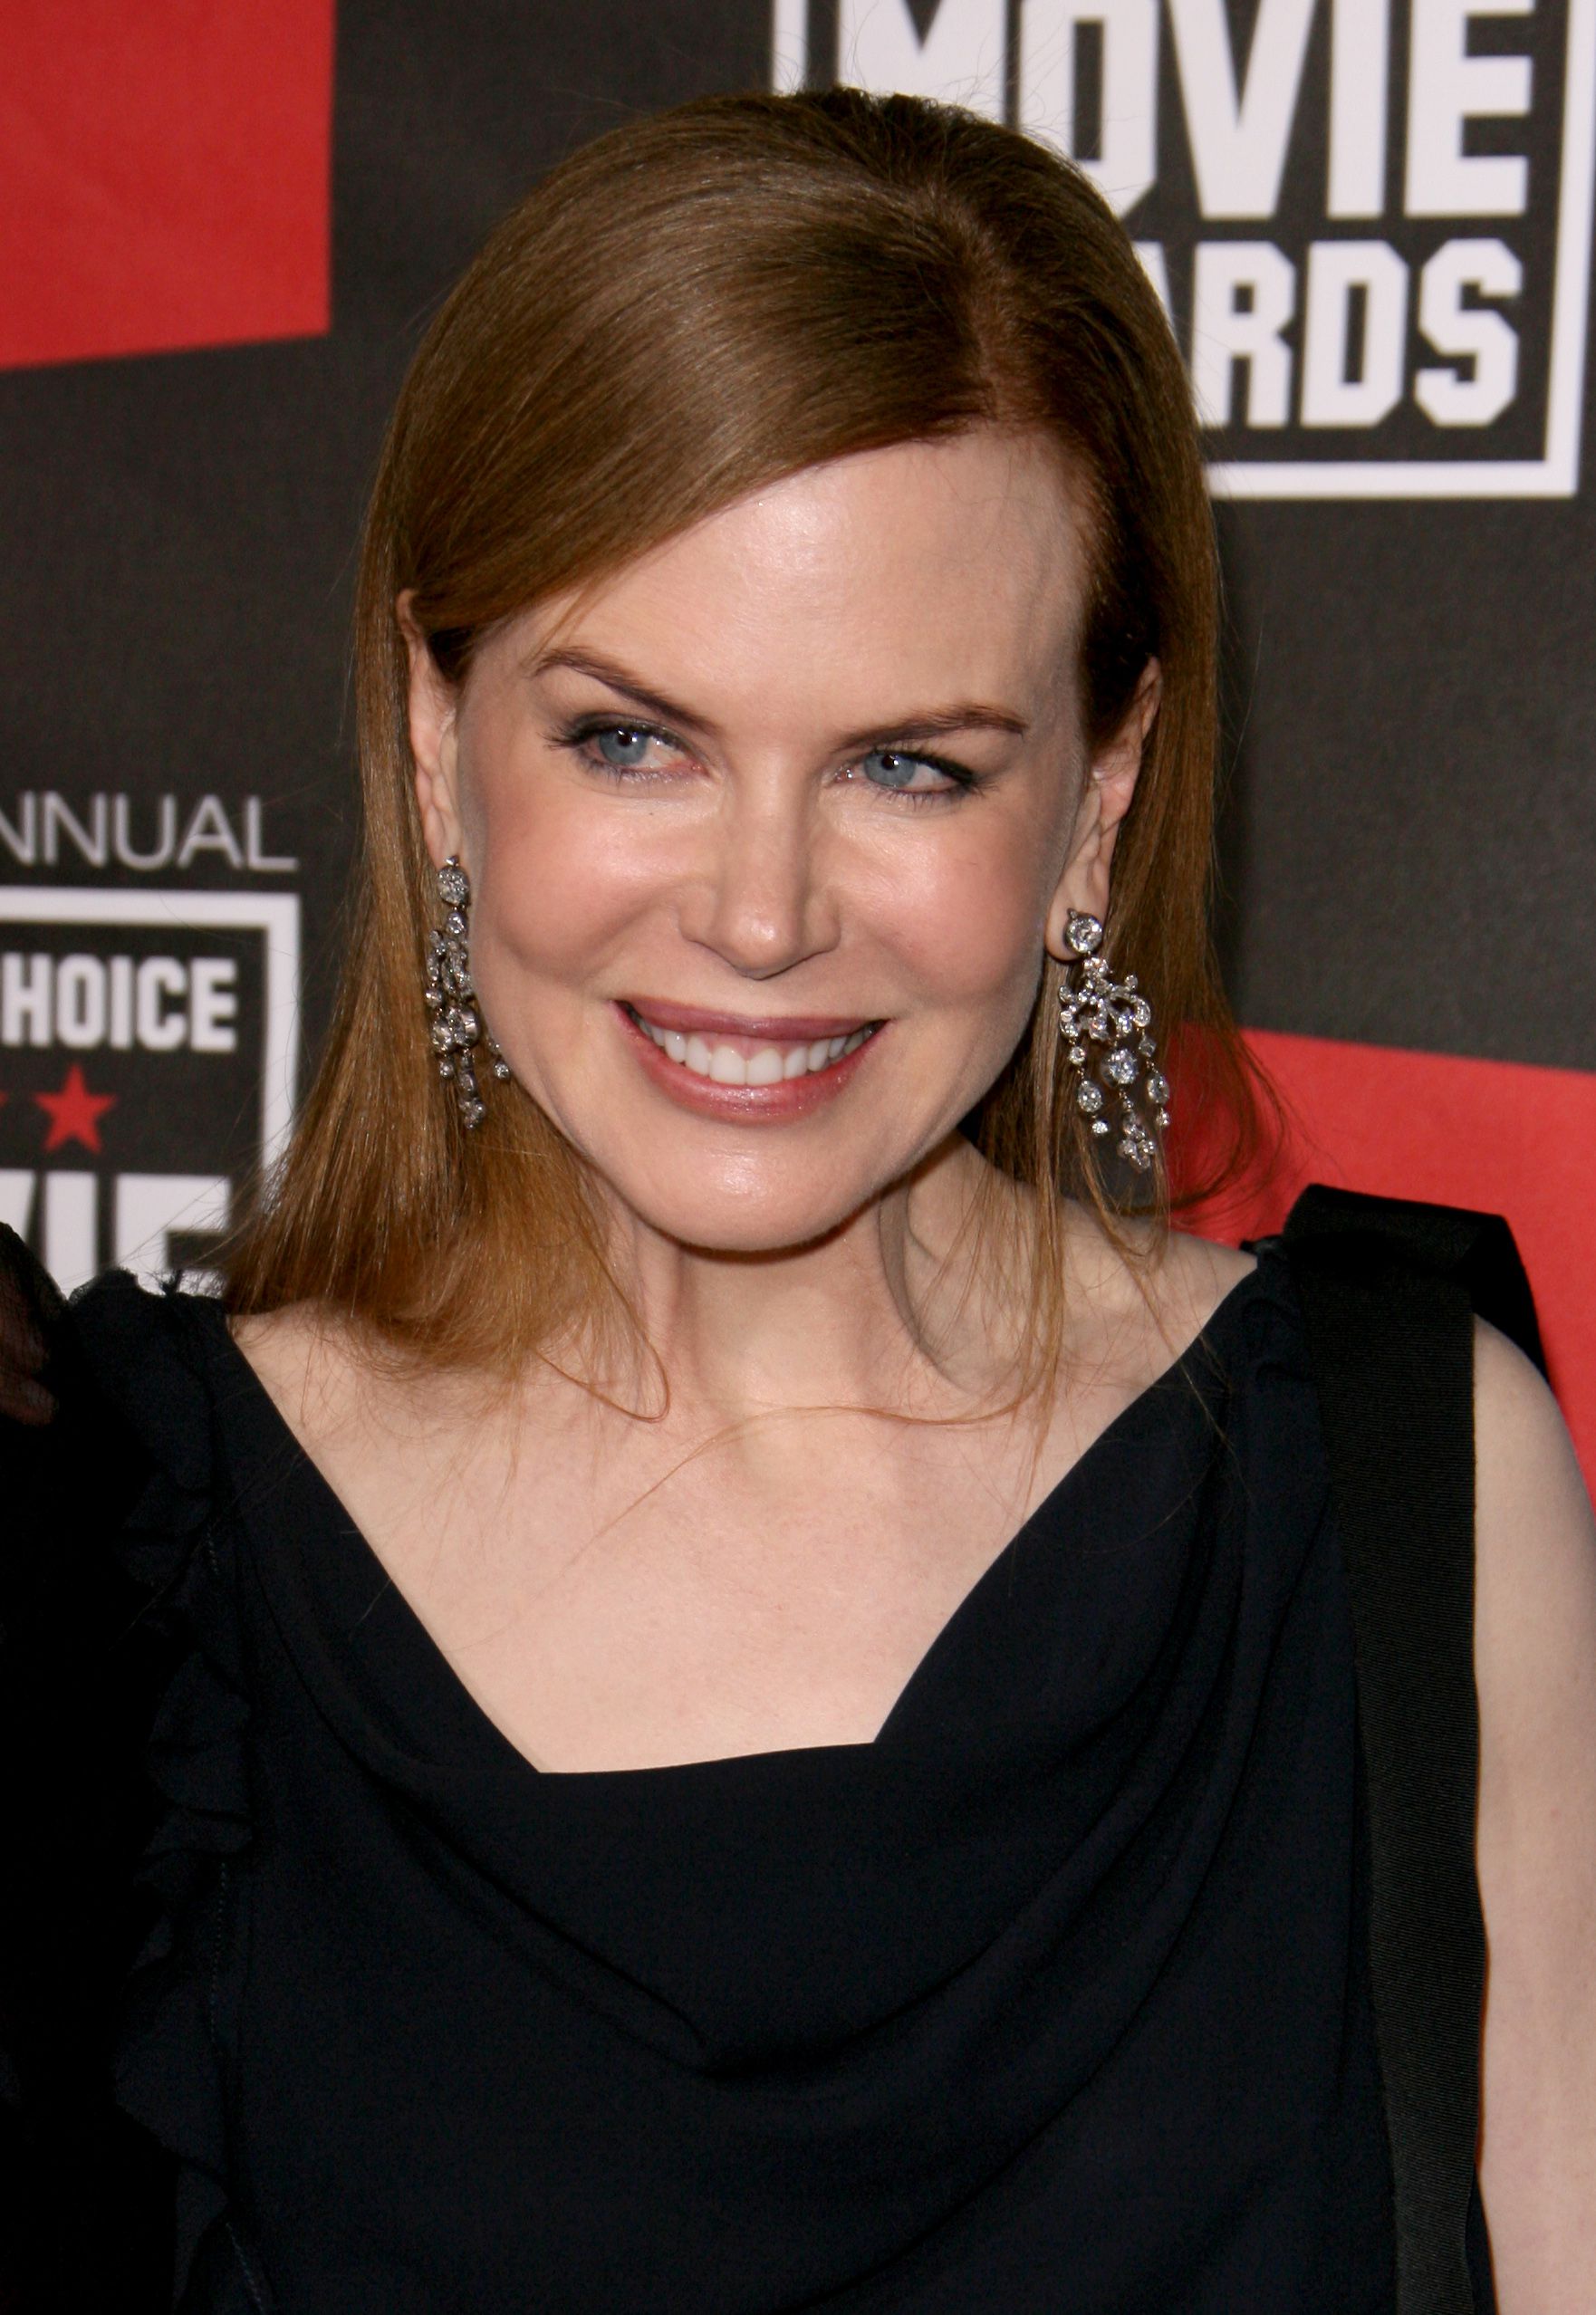 <p>The change in <a href="https://www.wonderwall.com/celebrity/profiles/overview/nicole-kidman-364.article">Nicole Kidman</a>'s look could be attributed to the gradual loss of baby fat, but the actress (pictured in 2011) has admitted that she once had a Botox habit. We're glad she gave it up -- because she looks better when she can move her face, as she admitted herself in 2013. "I did try Botox, unfortunately, but I got out of it and now I can finally move my face again," she told the Italian newspaper La Repubblica, calling the decision to get injections an "unfortunate move."</p>